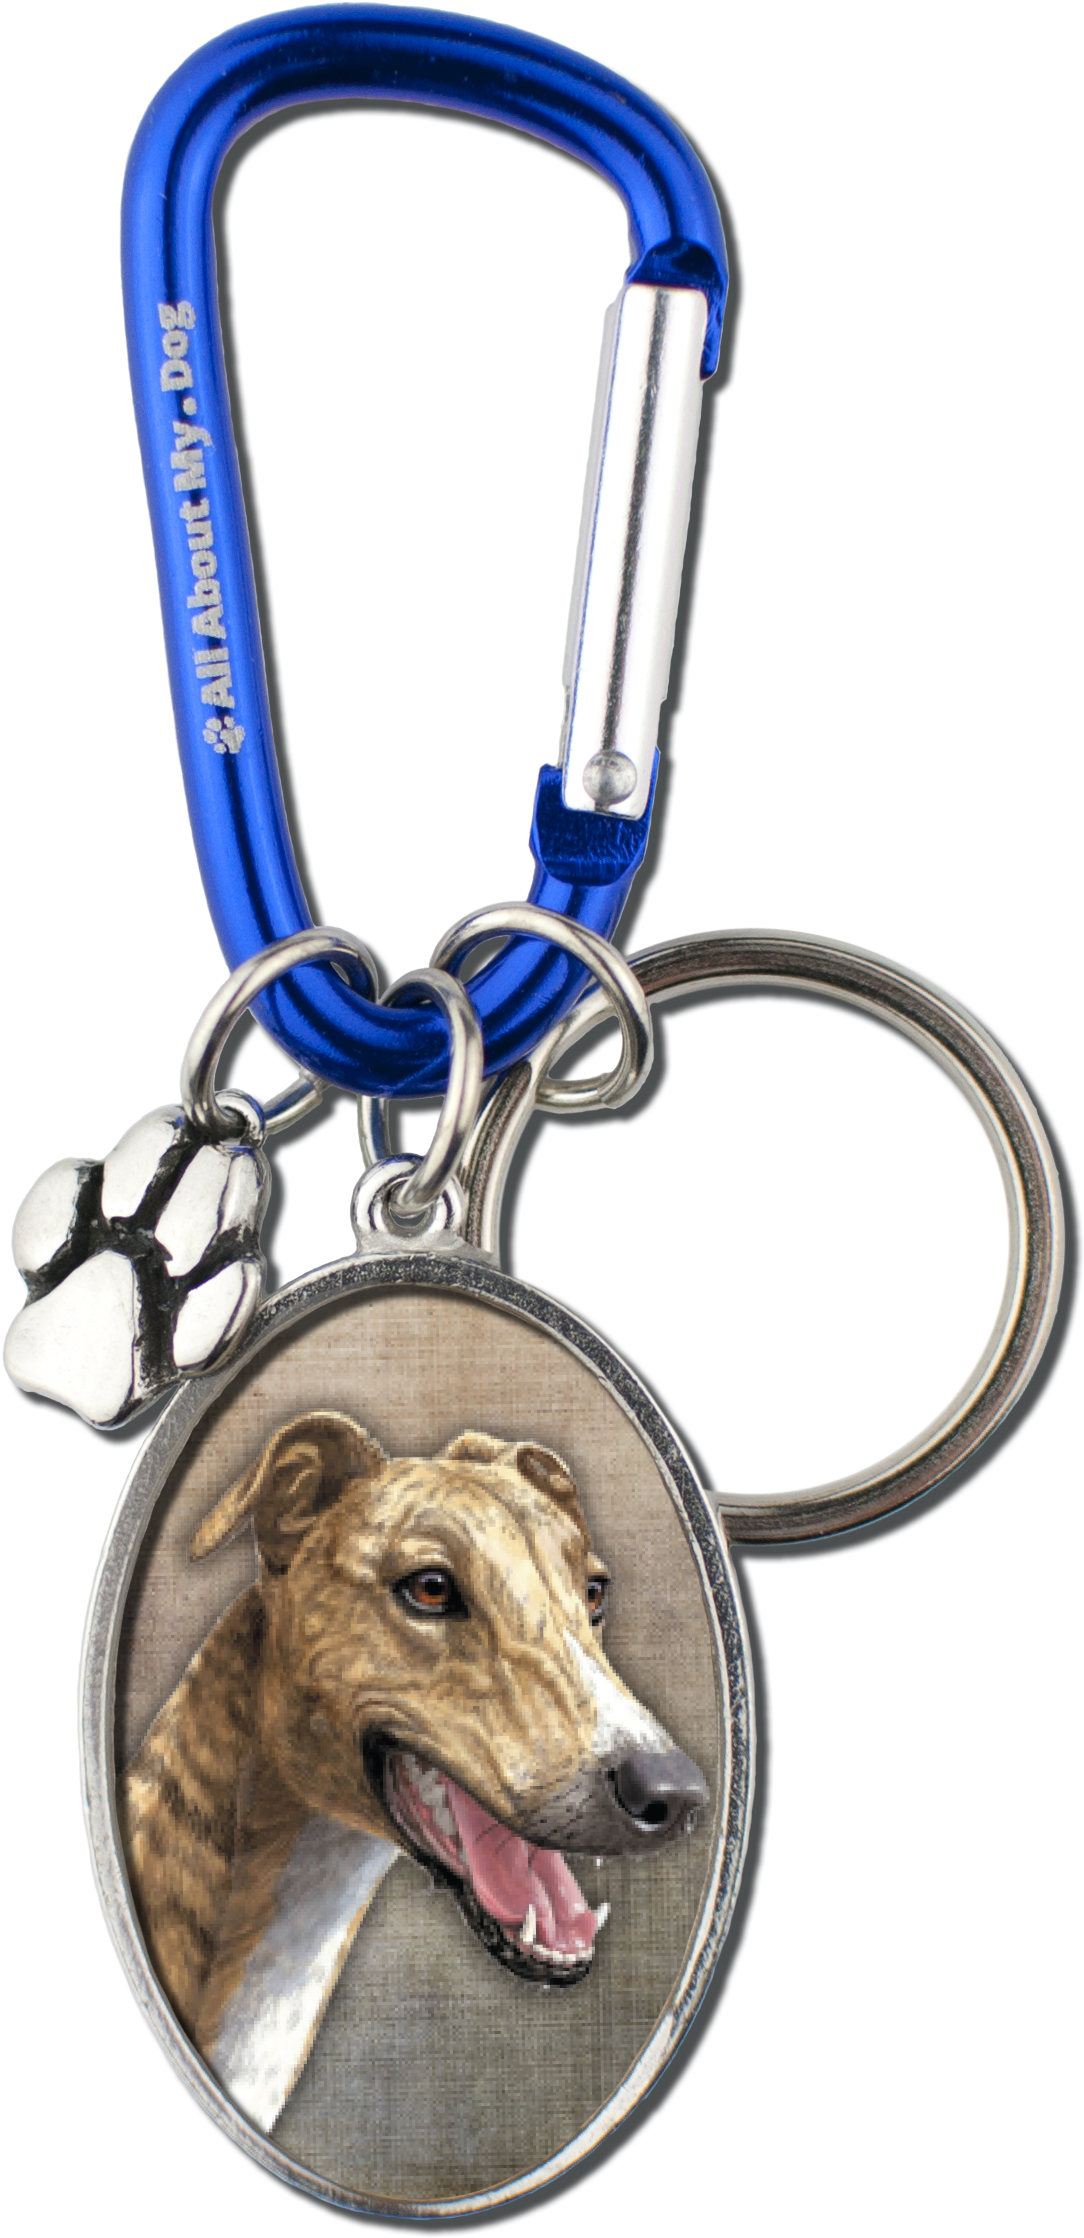 A Dog Key Chain With A Picture Of A Dog